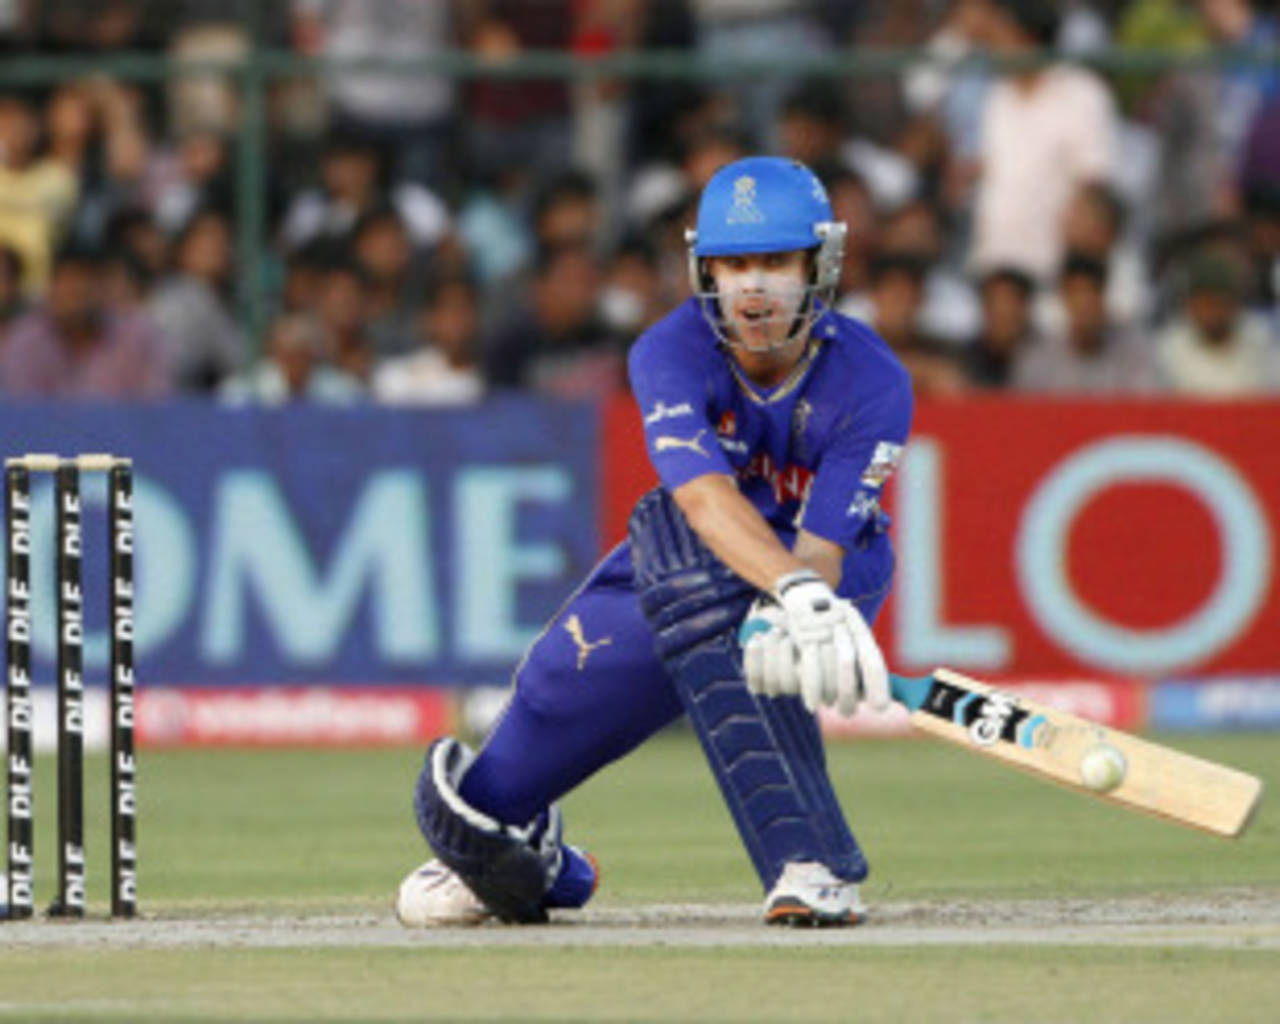 Johan Botha had suffered a blow to the knee while playing for Rajasthan Royals in the IPL&nbsp;&nbsp;&bull;&nbsp;&nbsp;Associated Press